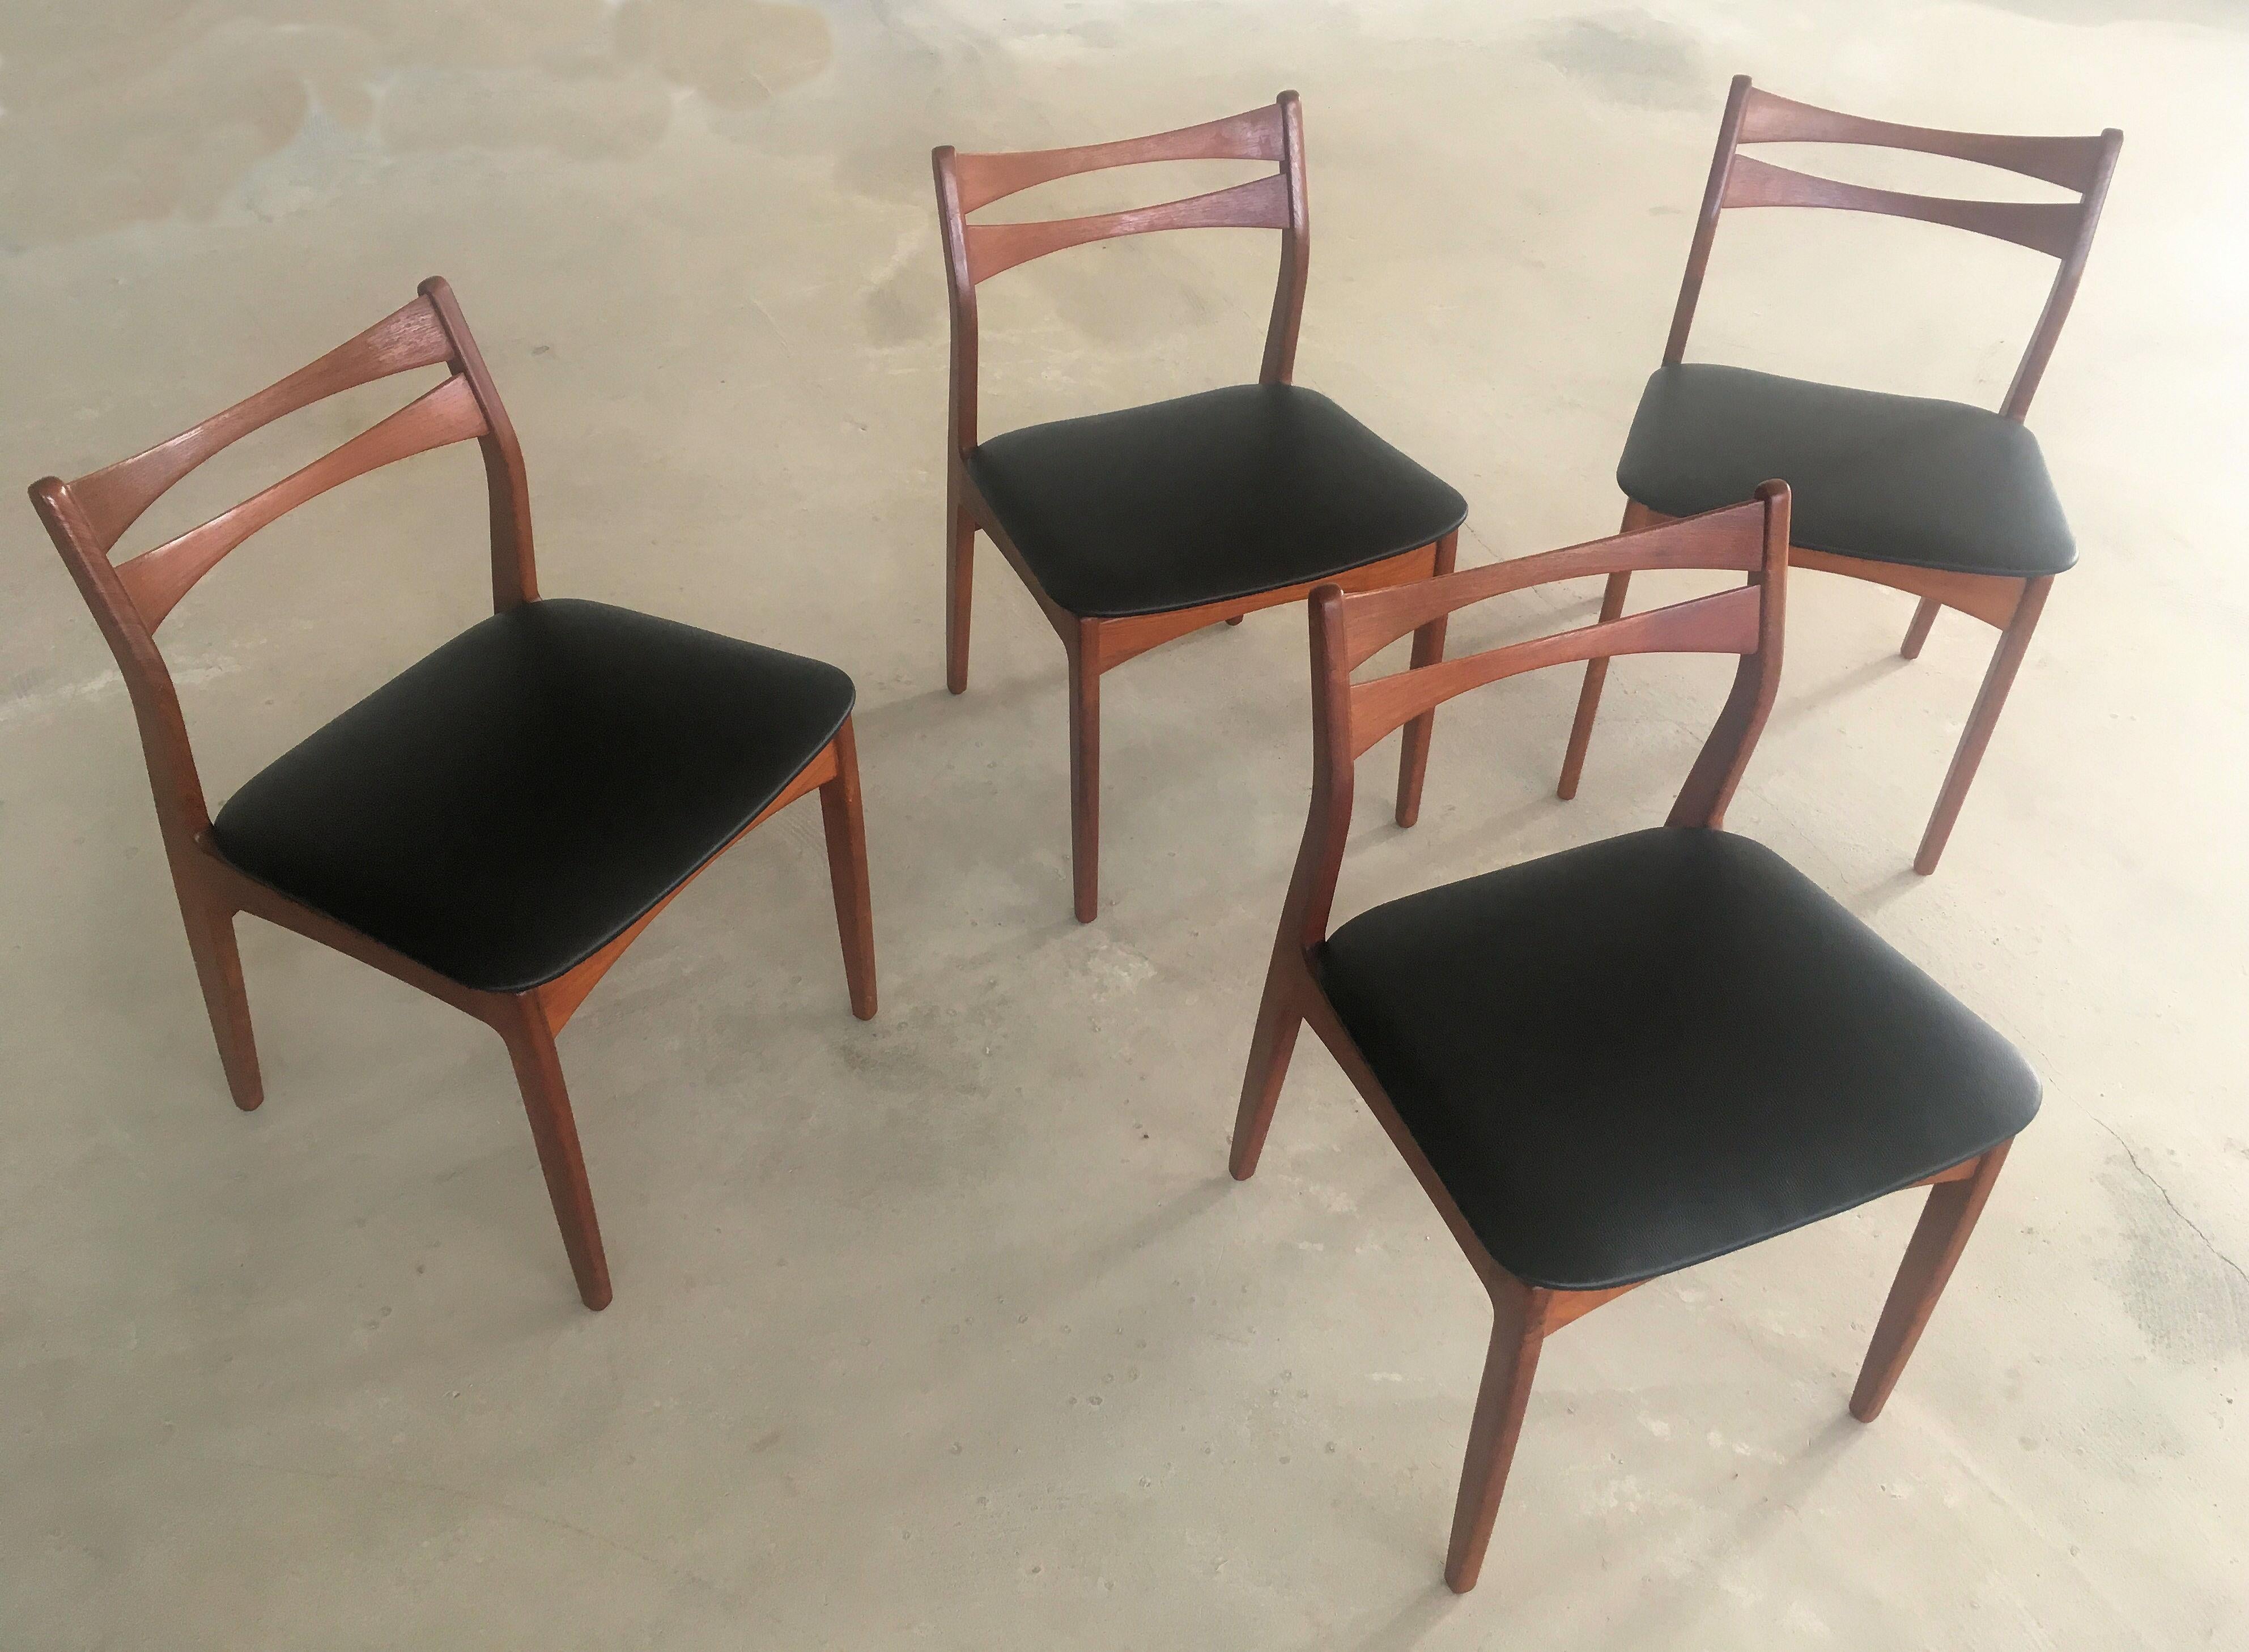 Set of four Danish teak dining chairs from the 1960s

The well designed set has been restored and refinished by our cabinetmaker and is in very good condition and seats have been reupholstered in black faux leather.